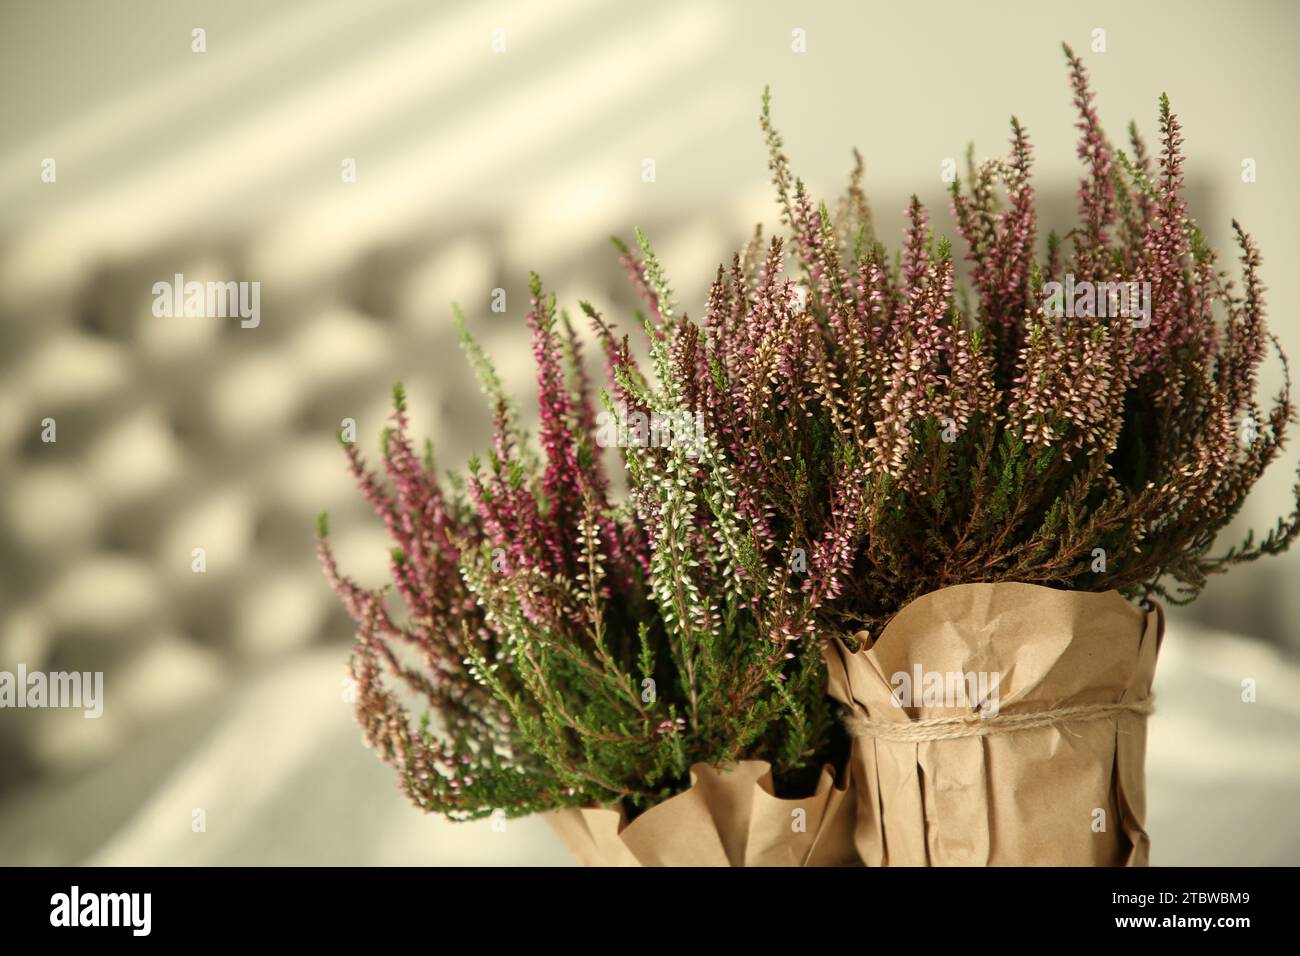 Beautiful heather flowers in pots against blurred background, closeup Stock Photo